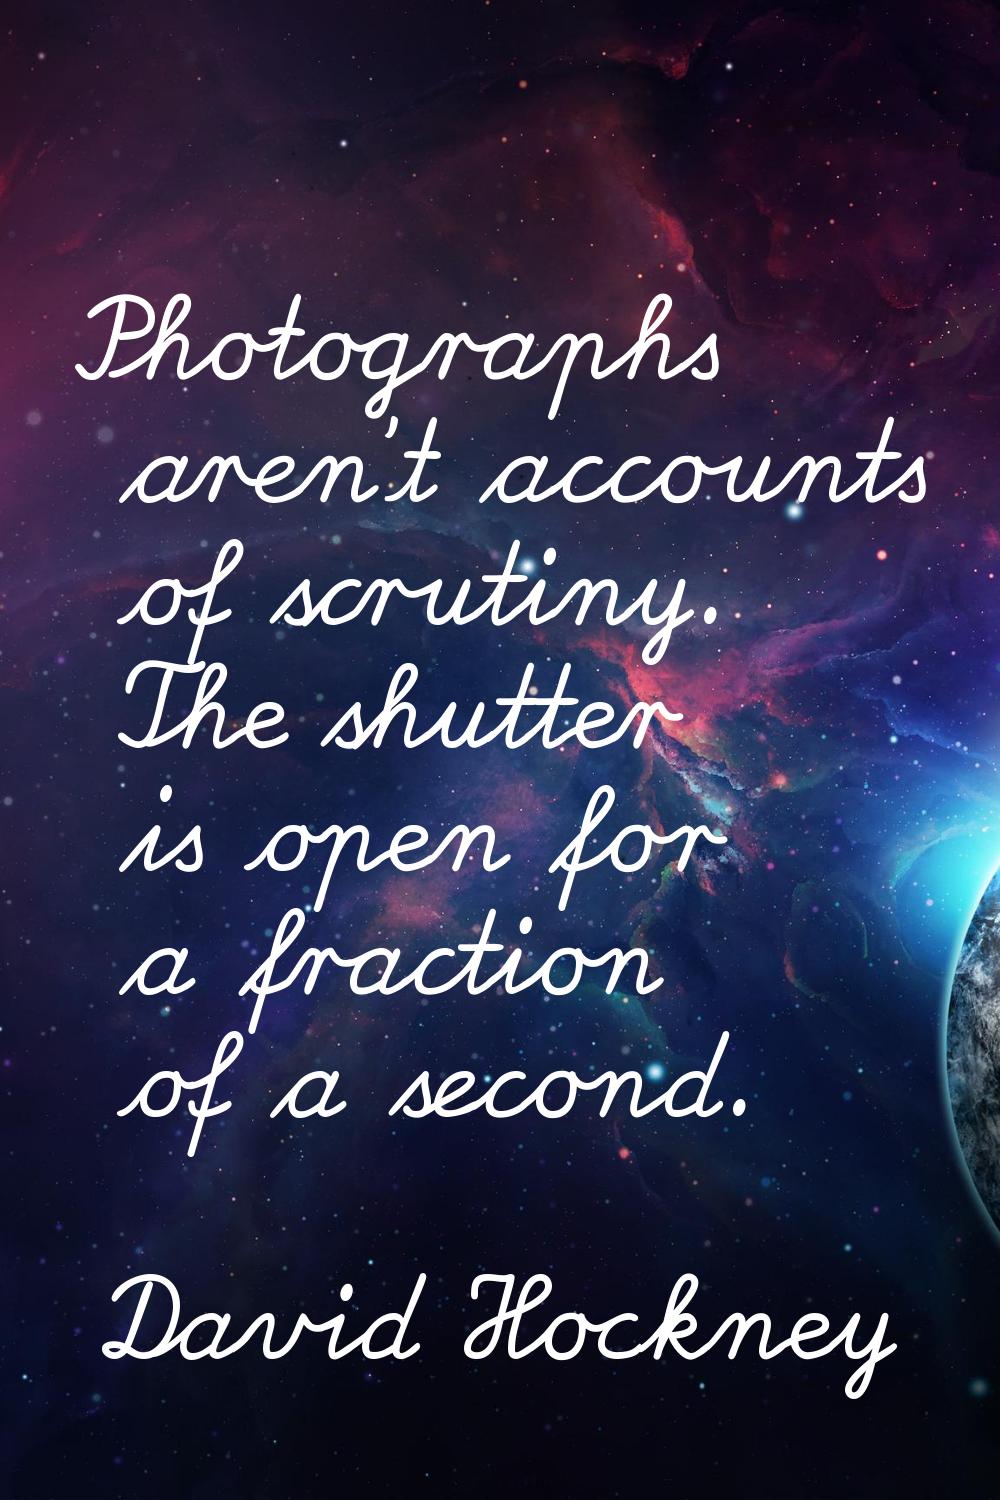 Photographs aren't accounts of scrutiny. The shutter is open for a fraction of a second.